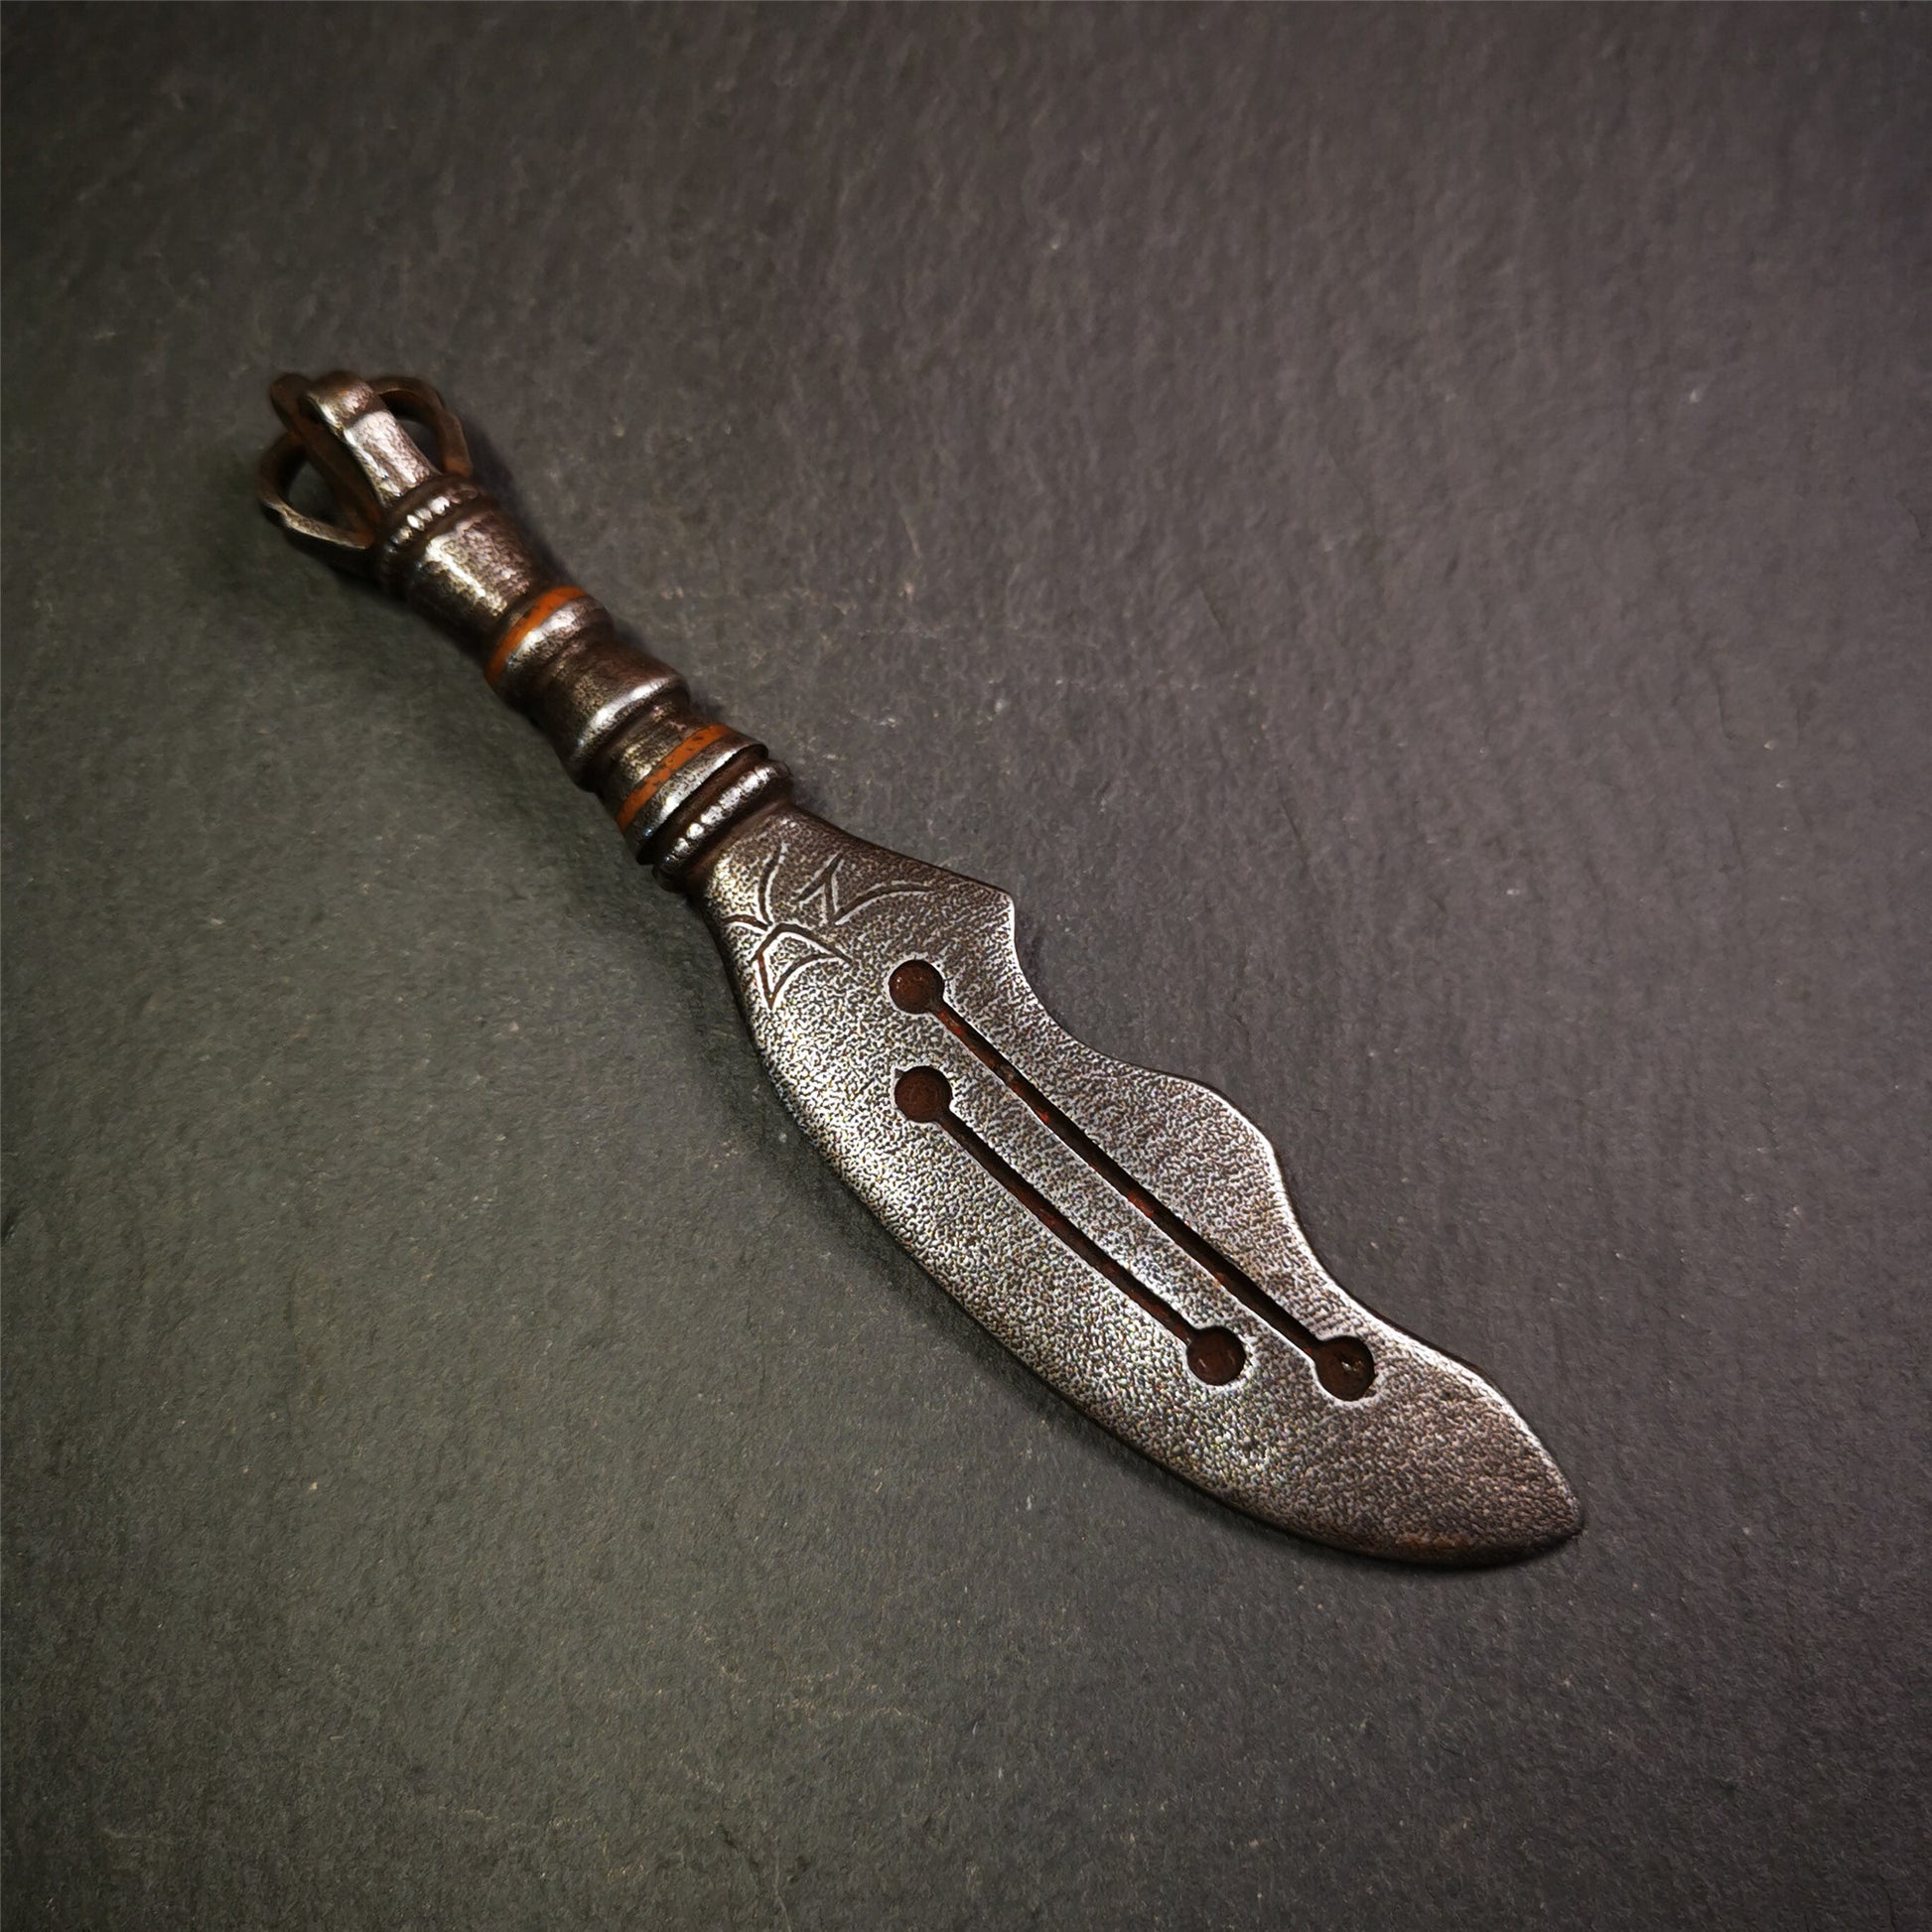 This machete knife is handmade by Tibetan craftsmen from Tibet in 2000s,from Hepo Town, Baiyu County, the birthplace of the famous Tibetan handicrafts.  It's made of cold iron,inlaid red copper wire, and the half vajra at the tail